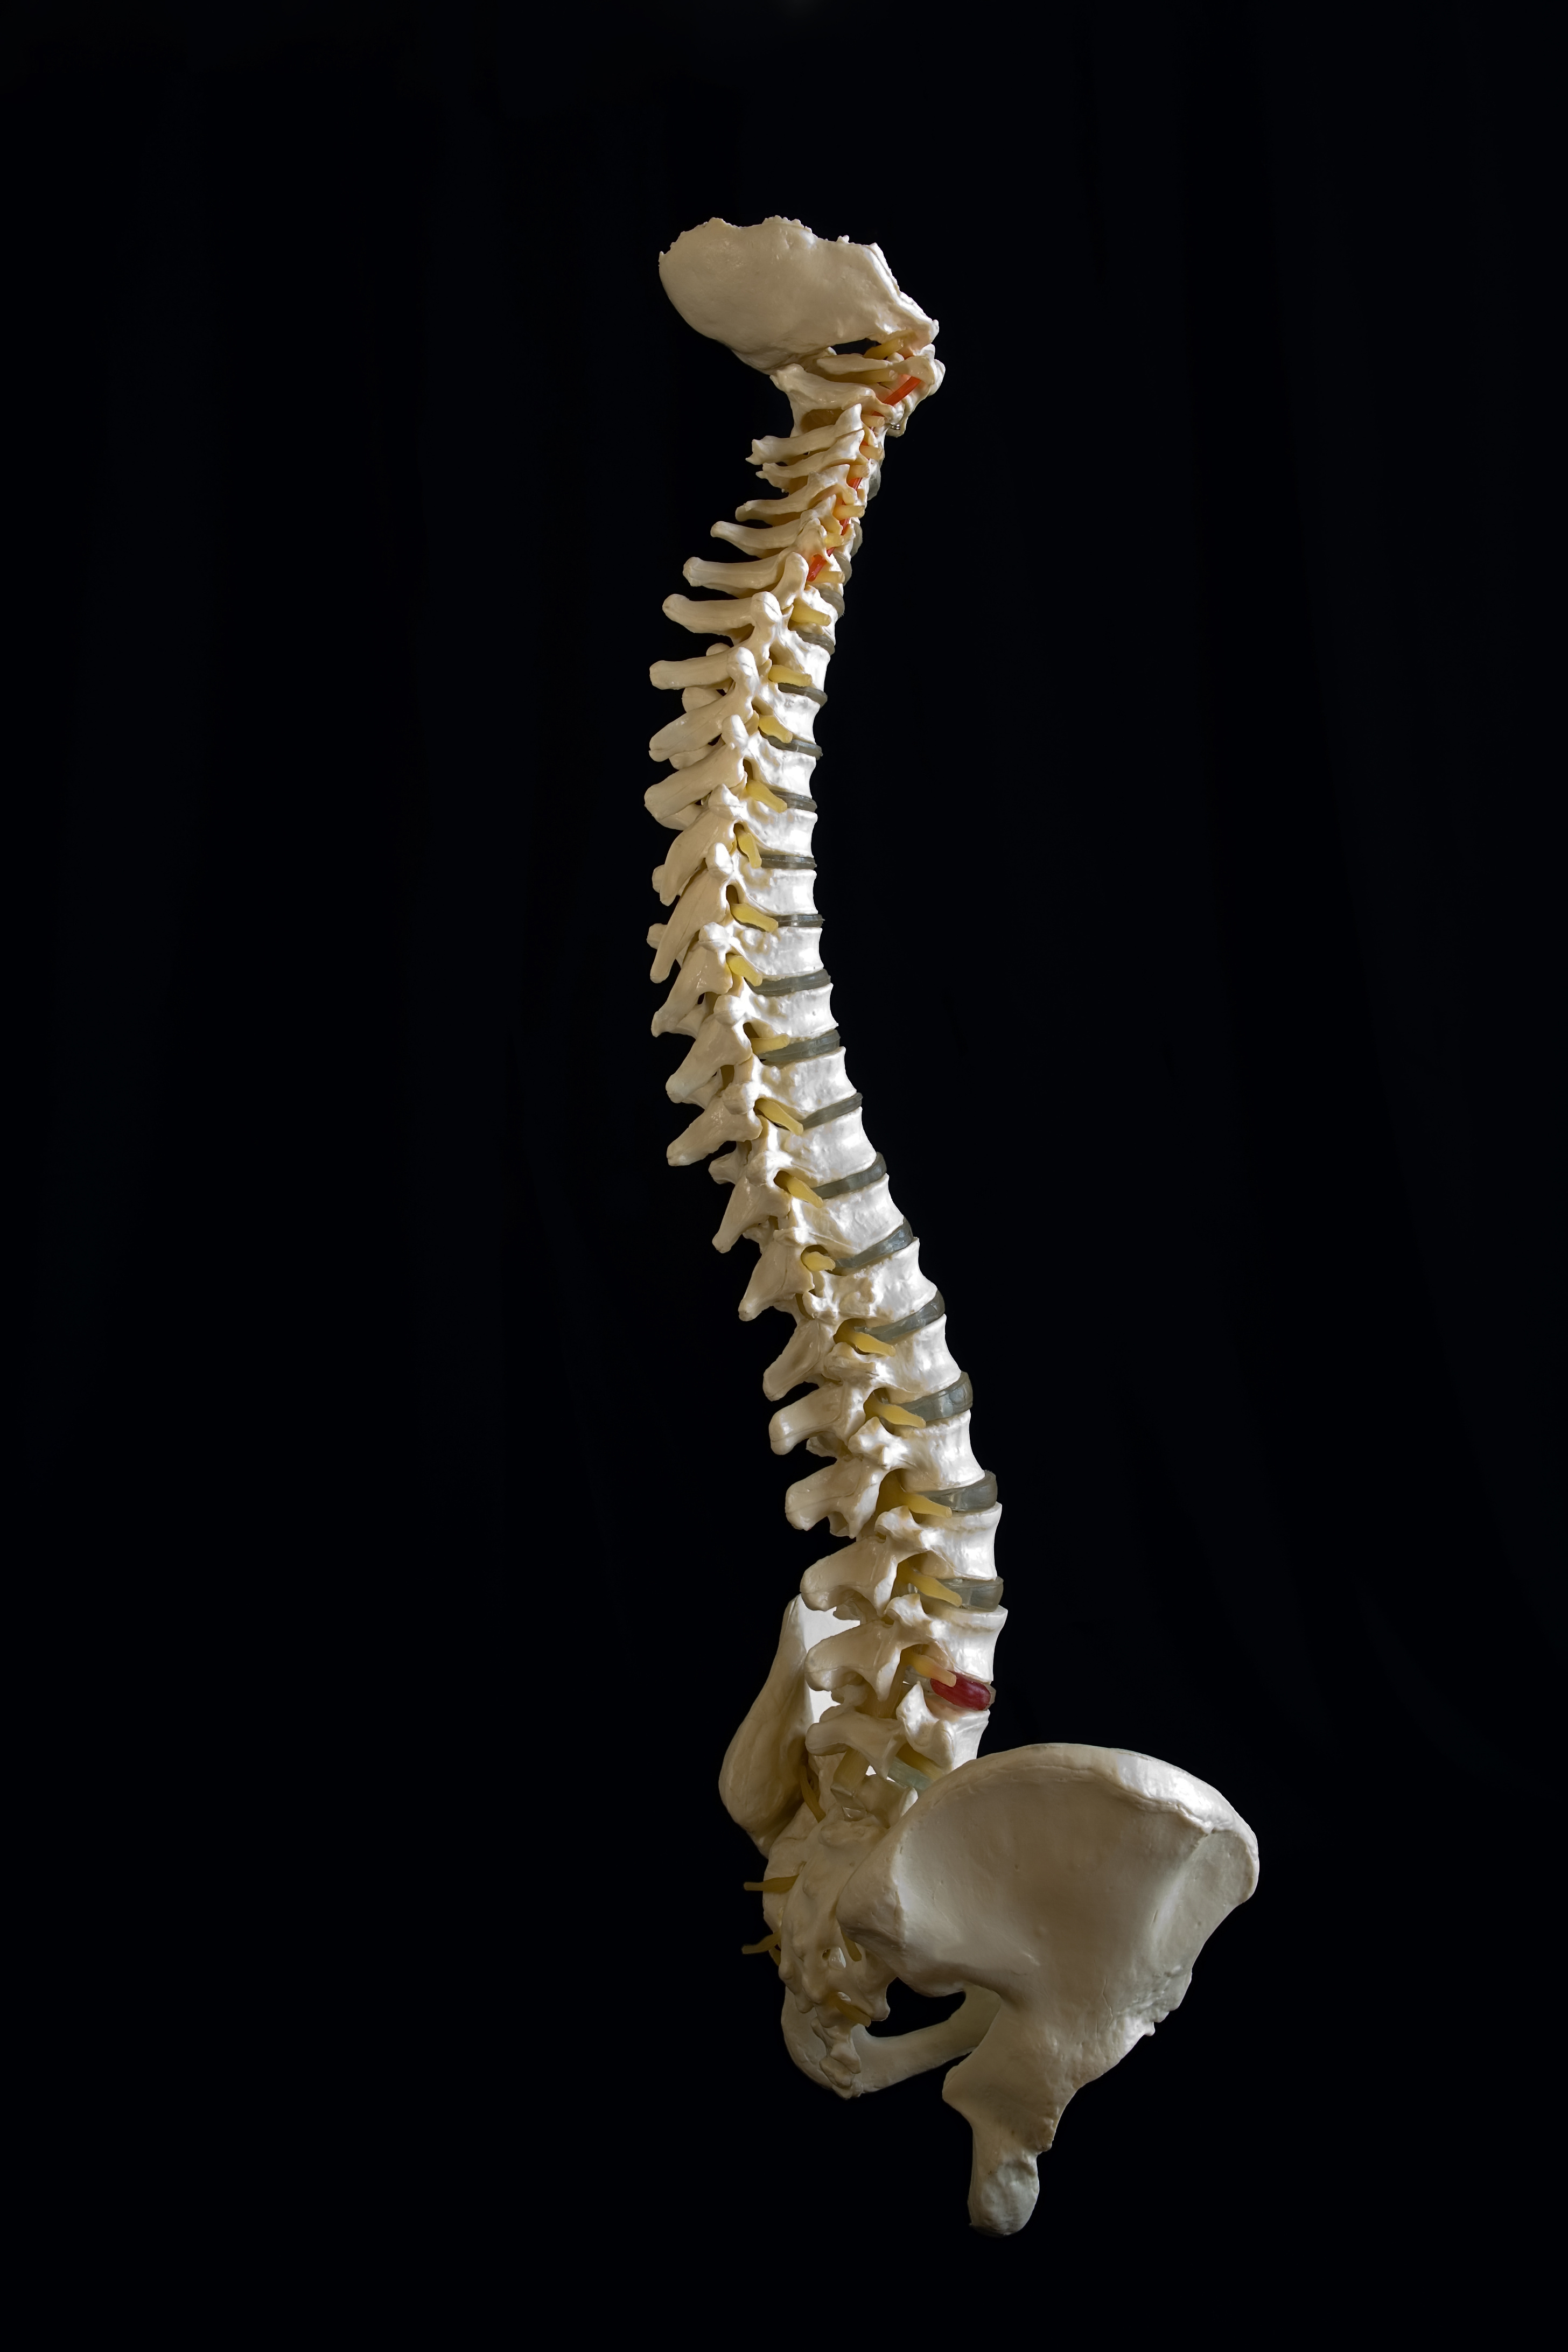 Spinal Cord Photo